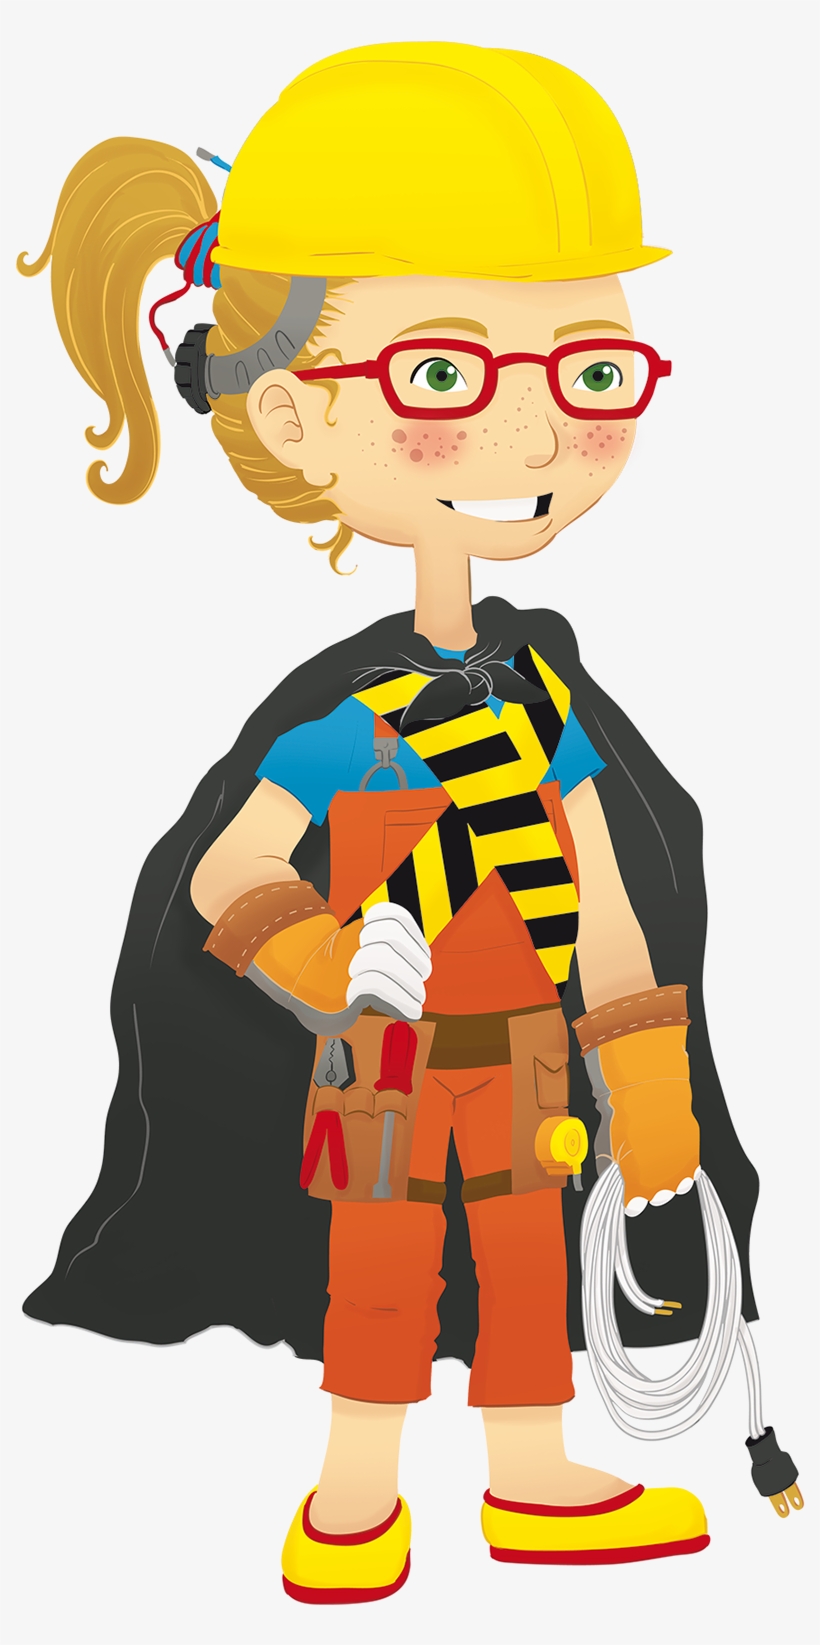 Could Turn Into “element Superheroes” With Outfits - Superhero, transparent png #6479199